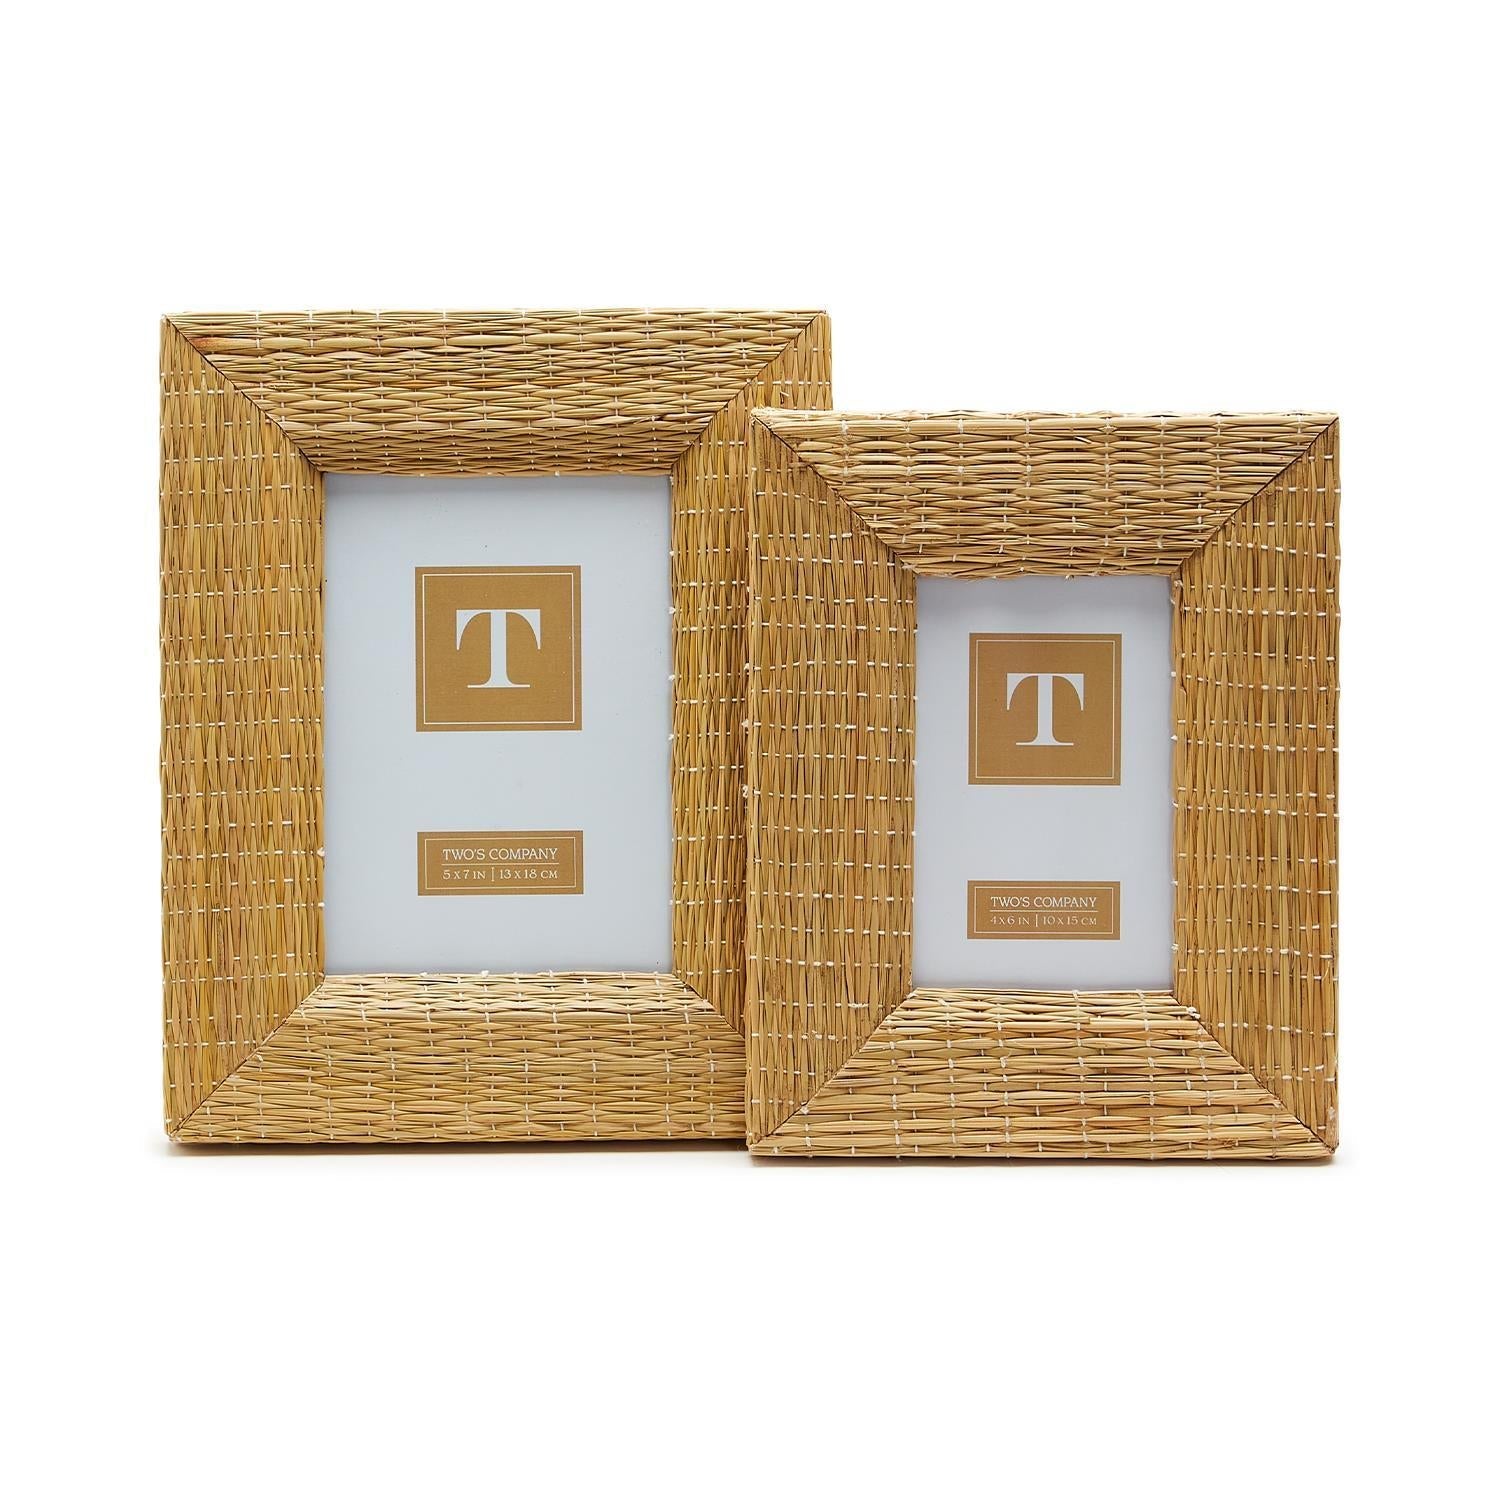 Woven Reeds S/2 Cane Photo Frames  Includes 4x6 and 5x7